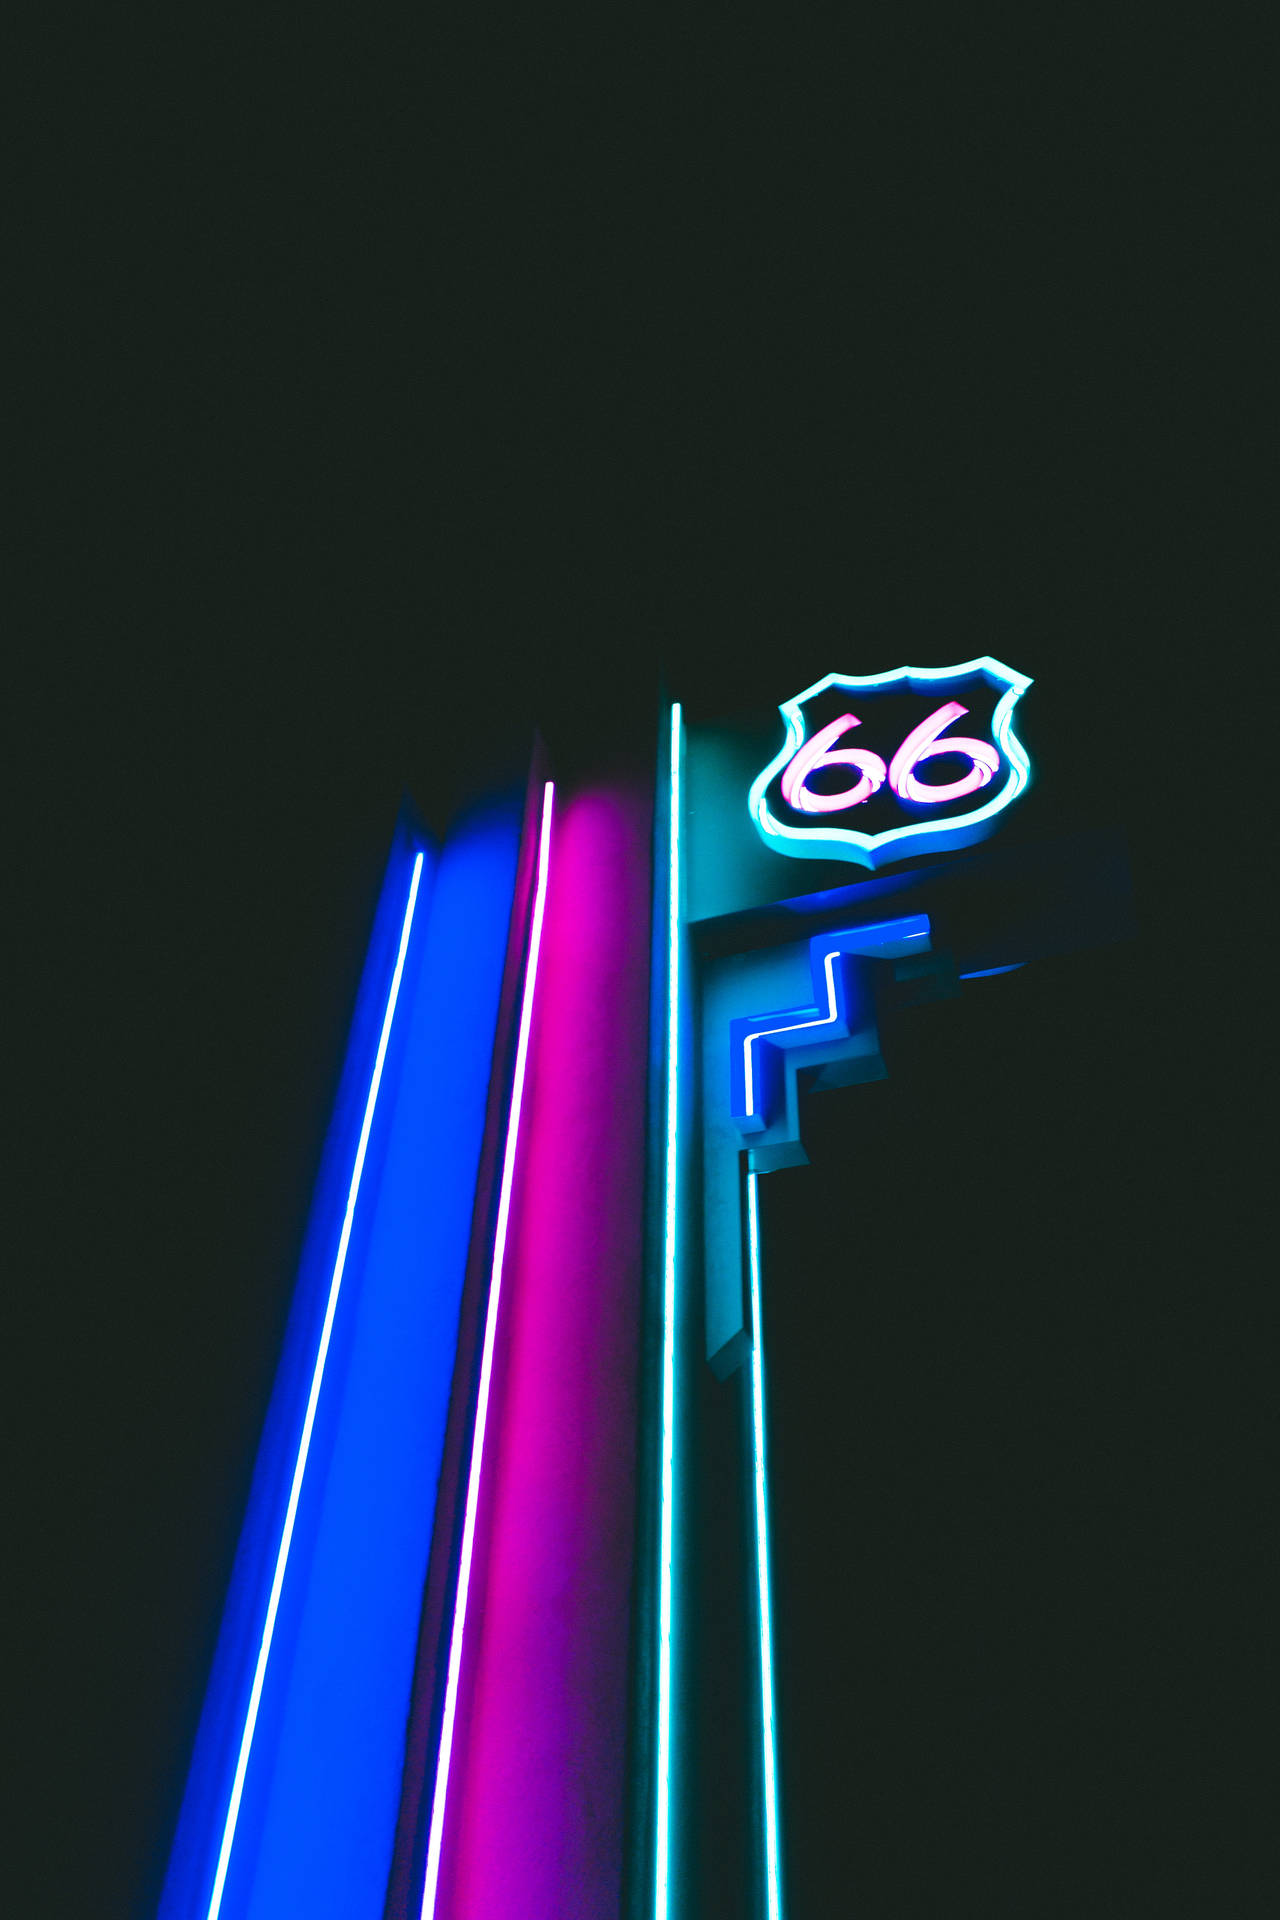 Neon 4000X6000 Wallpaper and Background Image